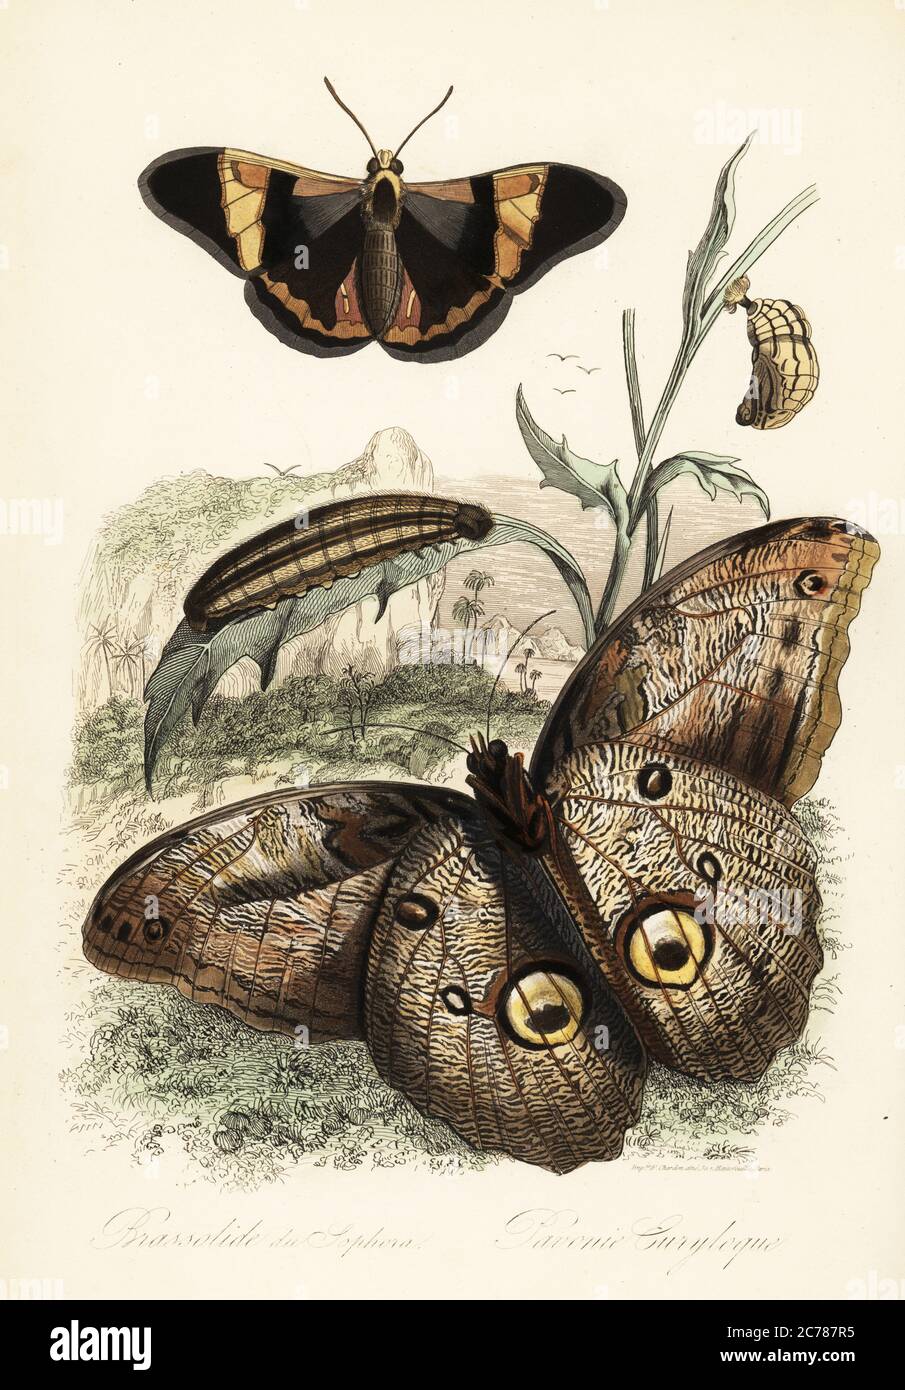 Brassolis sophorae butterfly, pupa and larva caterpillar (top) and forest giant owl, Caligo eurilochus (bottom). Brassolide du Sophora, Pavonie Euryloque. Illustration copied from Felix-Edouard Guerin-Meneville's Dictionnaire Pittoresque d'Histoire Naturelle. Handcoloured steel engraving printed by F. Chardon from Achille Comte’s Musee d’Histoire Naturelle, Museum of Natural History, Gustave Hazard, Paris, 1854. Stock Photo